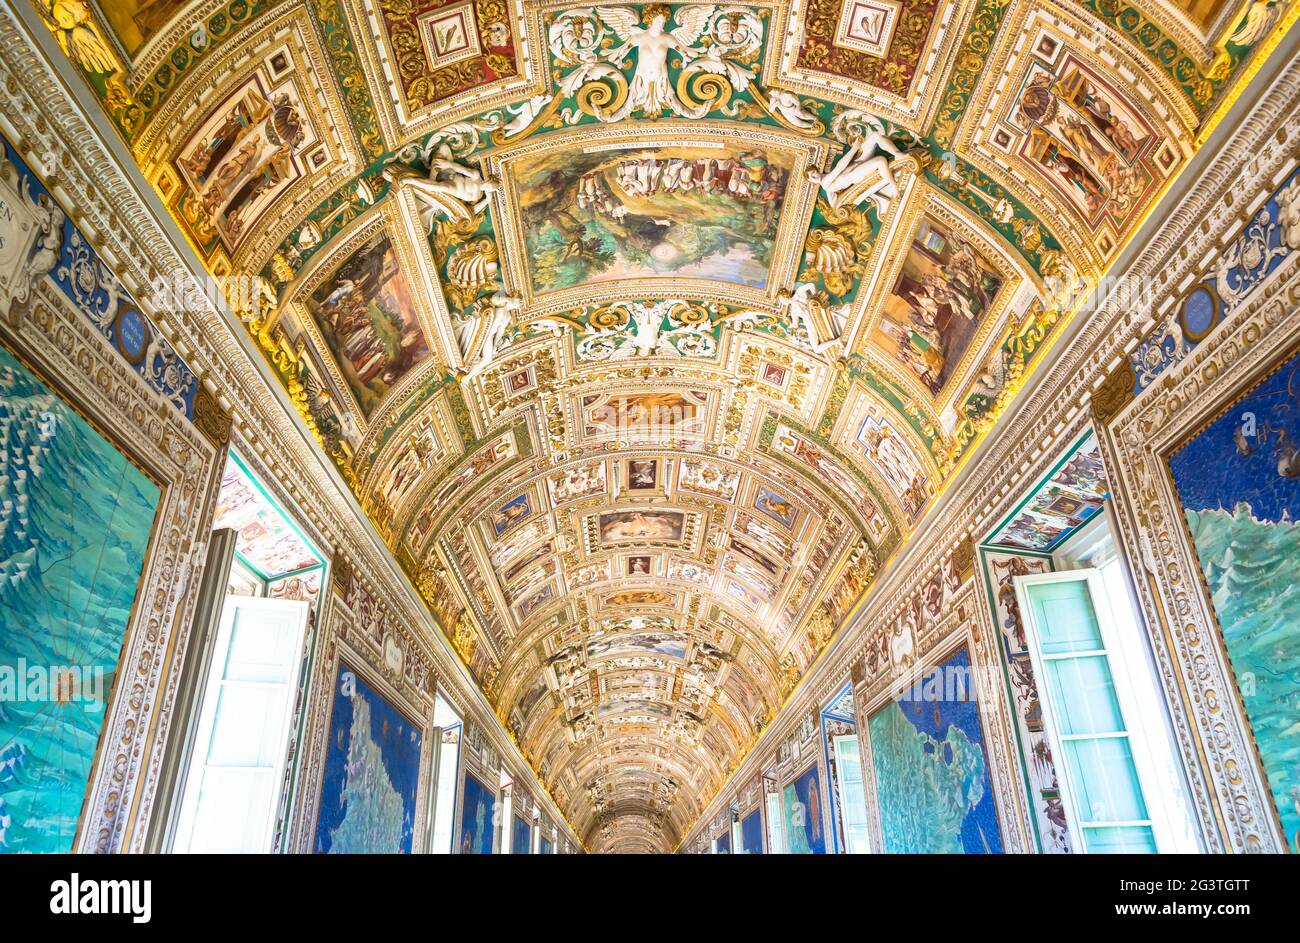 Perspective view in the Gallery of Maps in Vatican Museum, Vatican City, Rome. Stock Photo